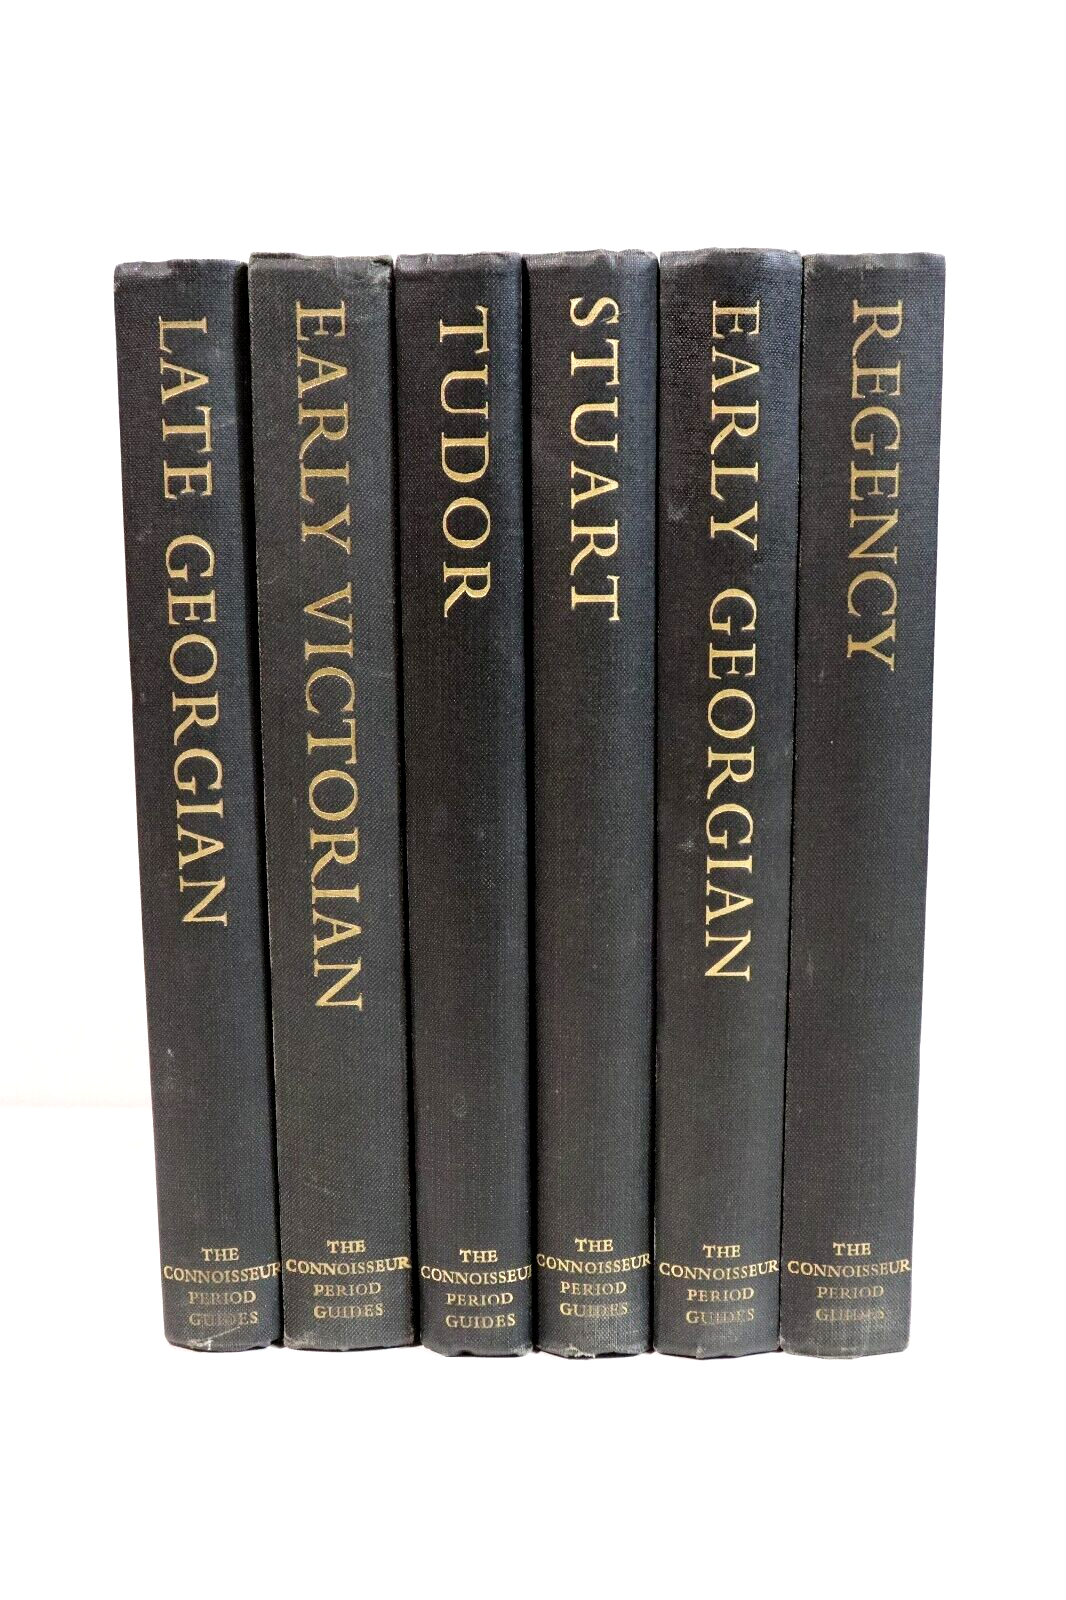 The Connoisseur Period Guides - 1956 - 6 Vol. Historical Reference Book Set